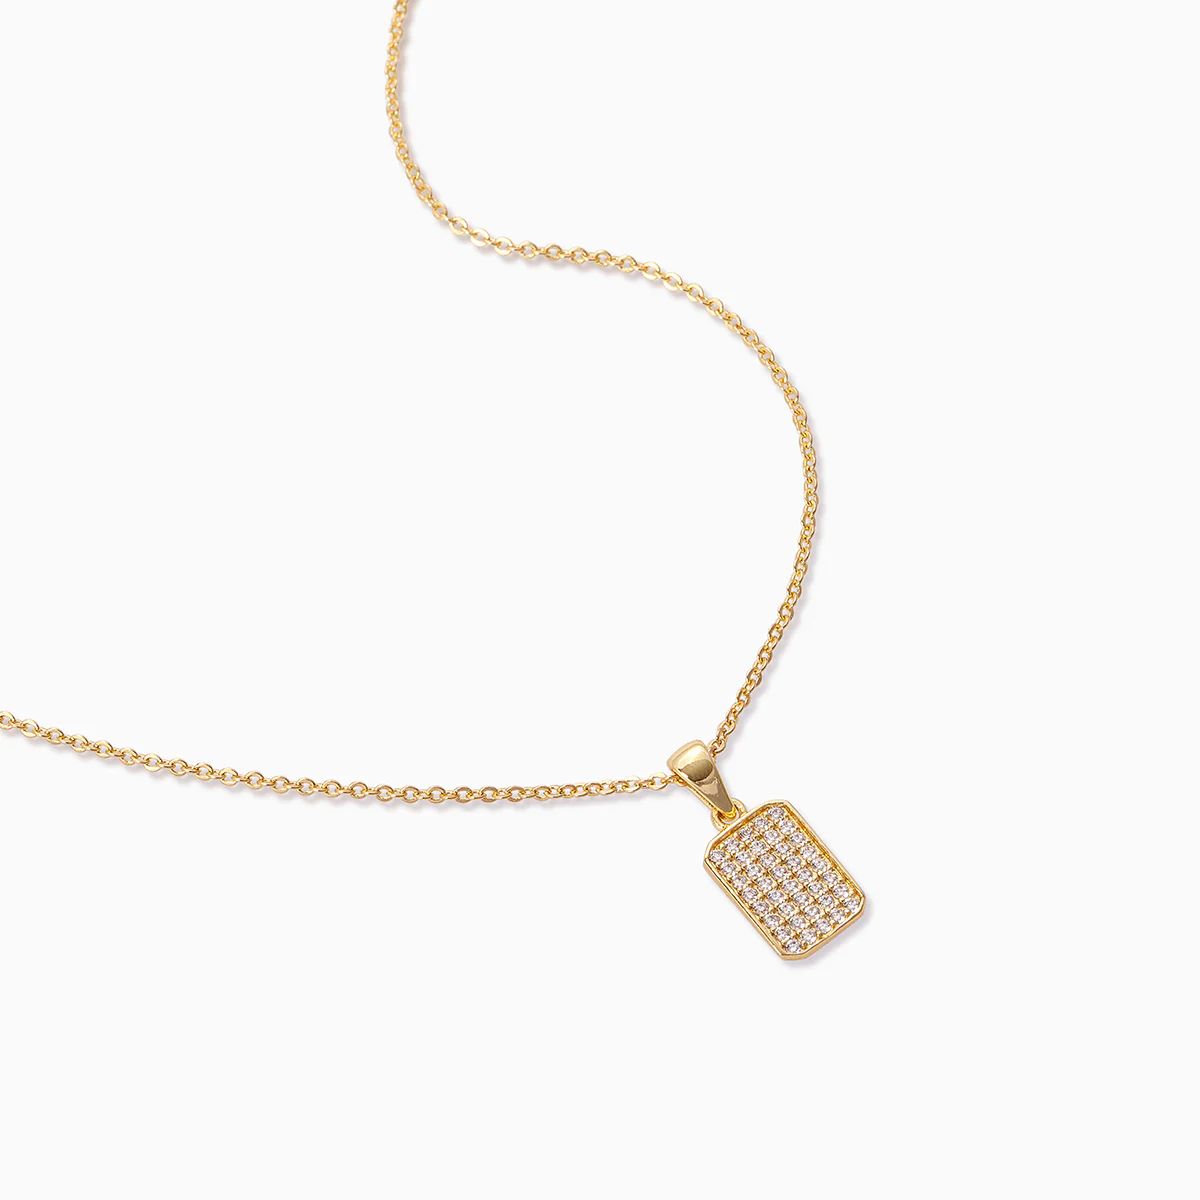 Shiner Necklace | Uncommon James